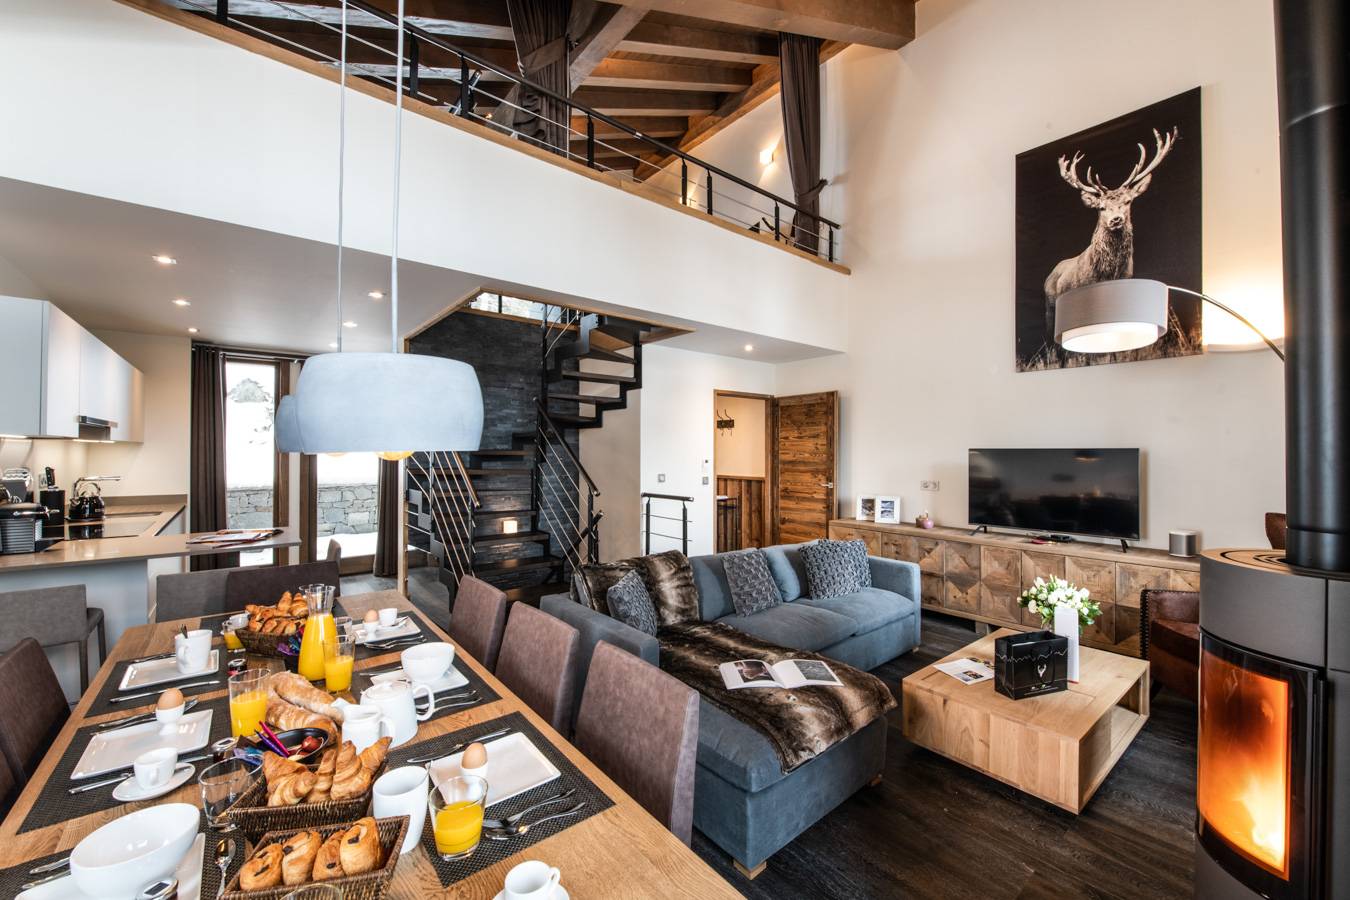 4 bedroom in Courchevel’s French Alps: A Fusion of Sport and Elegance